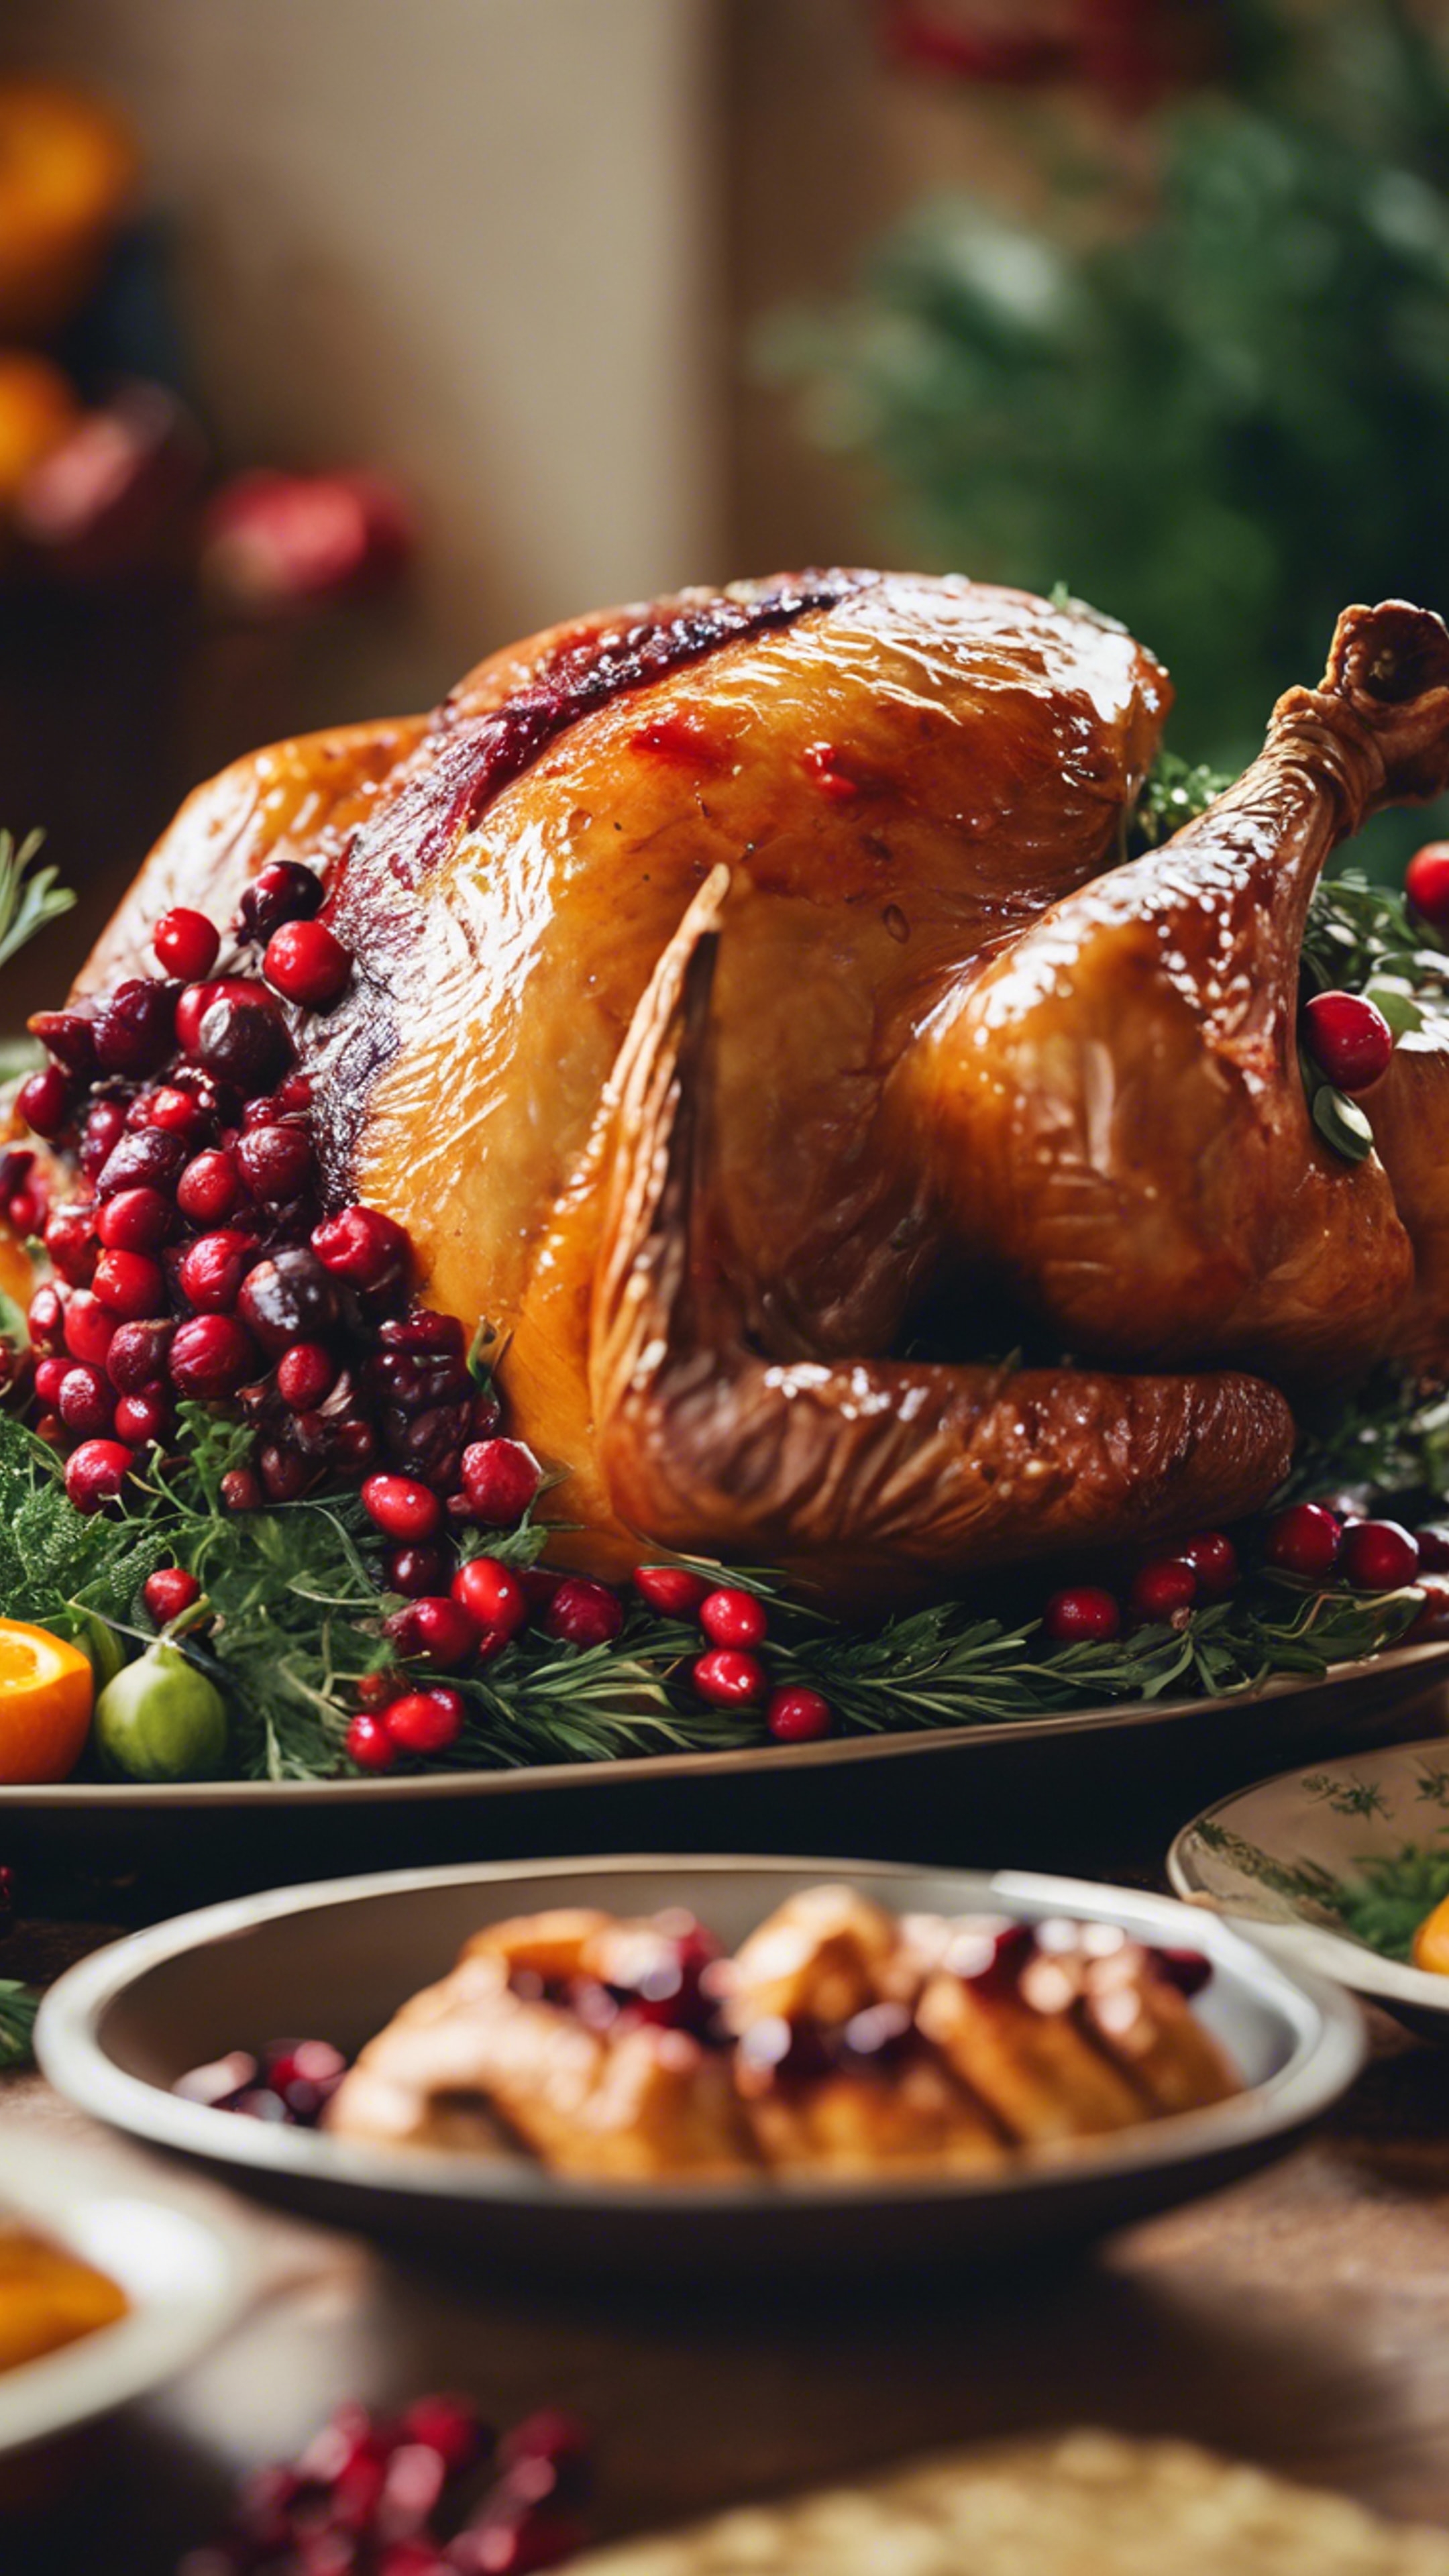 An artistic close-up of a traditional roast turkey on a Thanksgiving table, garnished with cranberries and herbs. duvar kağıdı[f7ada081b7d5471b890d]